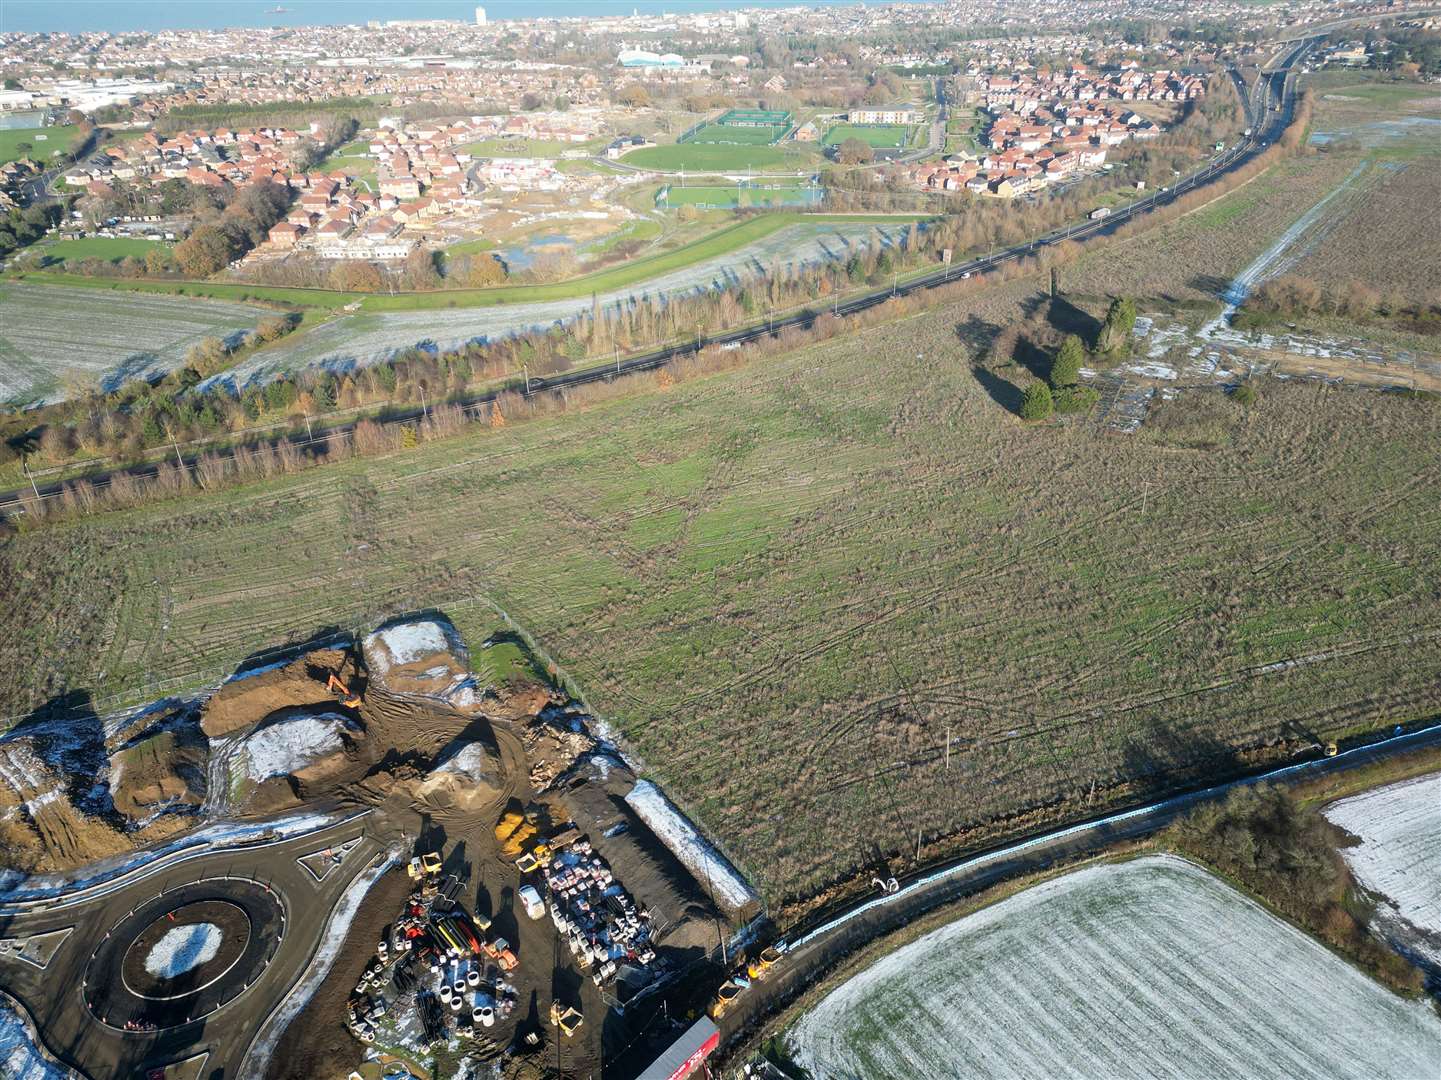 Strode Farm is one of four new developments set to line Bullockstone Road in Herne Bay. Picture: Barry Goodwin